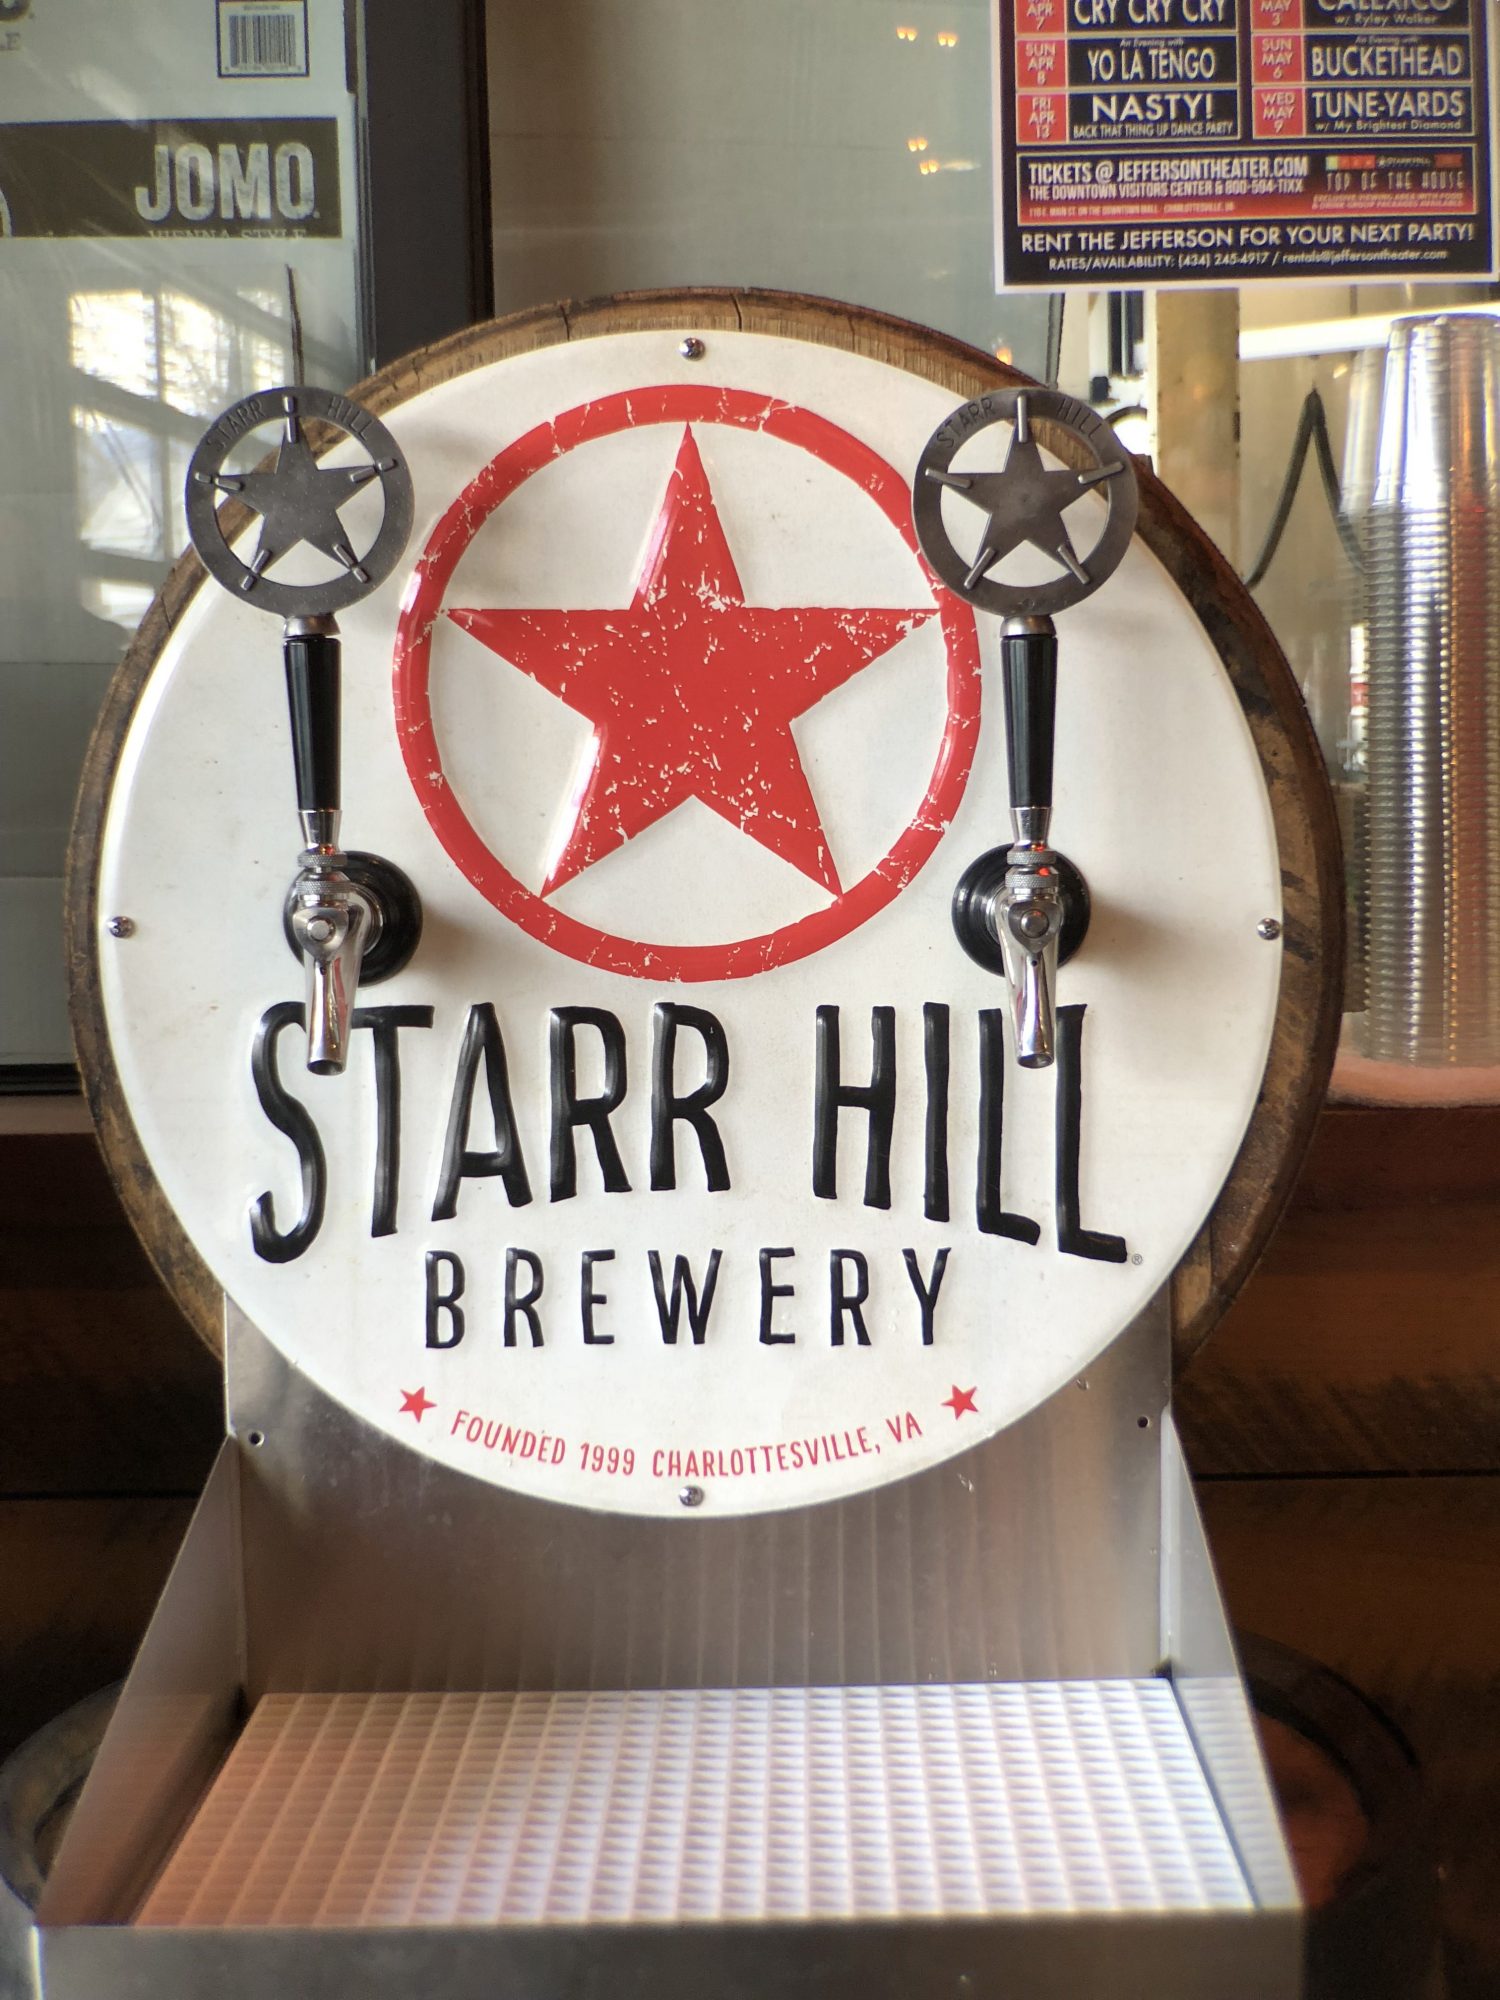 Starr Hill Brewery Image